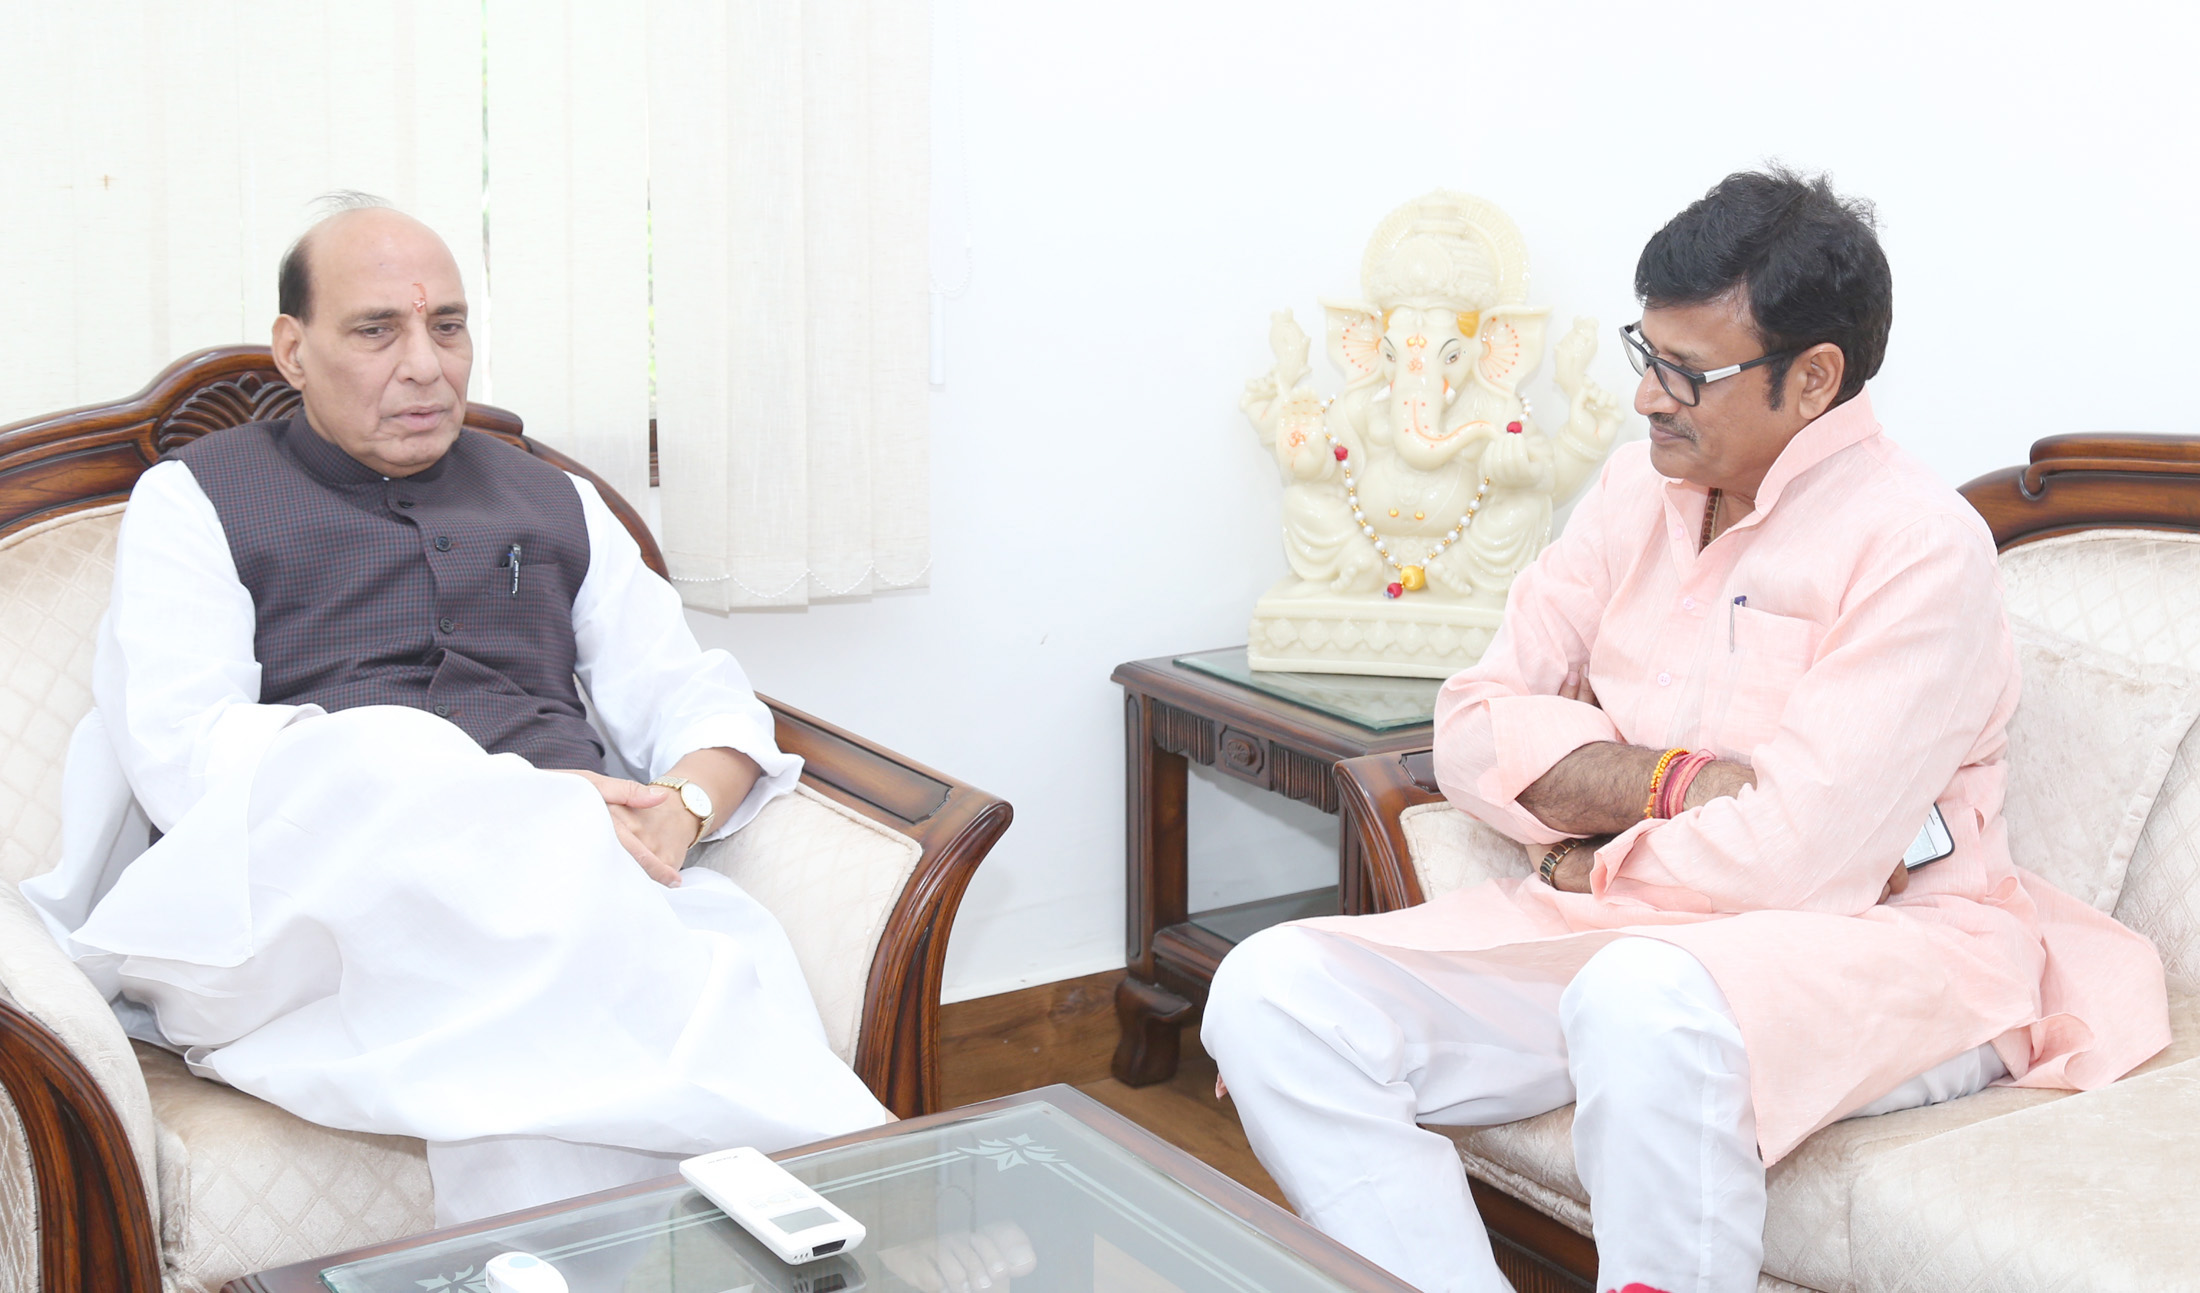 The Minister of Medical and Health, Medical and Health Services (ESI), Medical Education, Ayurveda & Indian Medical Methods, Law & Legal Affairs and Legal Consultancy Office, Parliamentary Affairs, Election, Waqf, Government of Rajasthan, Shri Rajendra Singh Rathore calling on the Union Home Minister, Shri Rajnath Singh, in New Delhi on July 12, 2016.